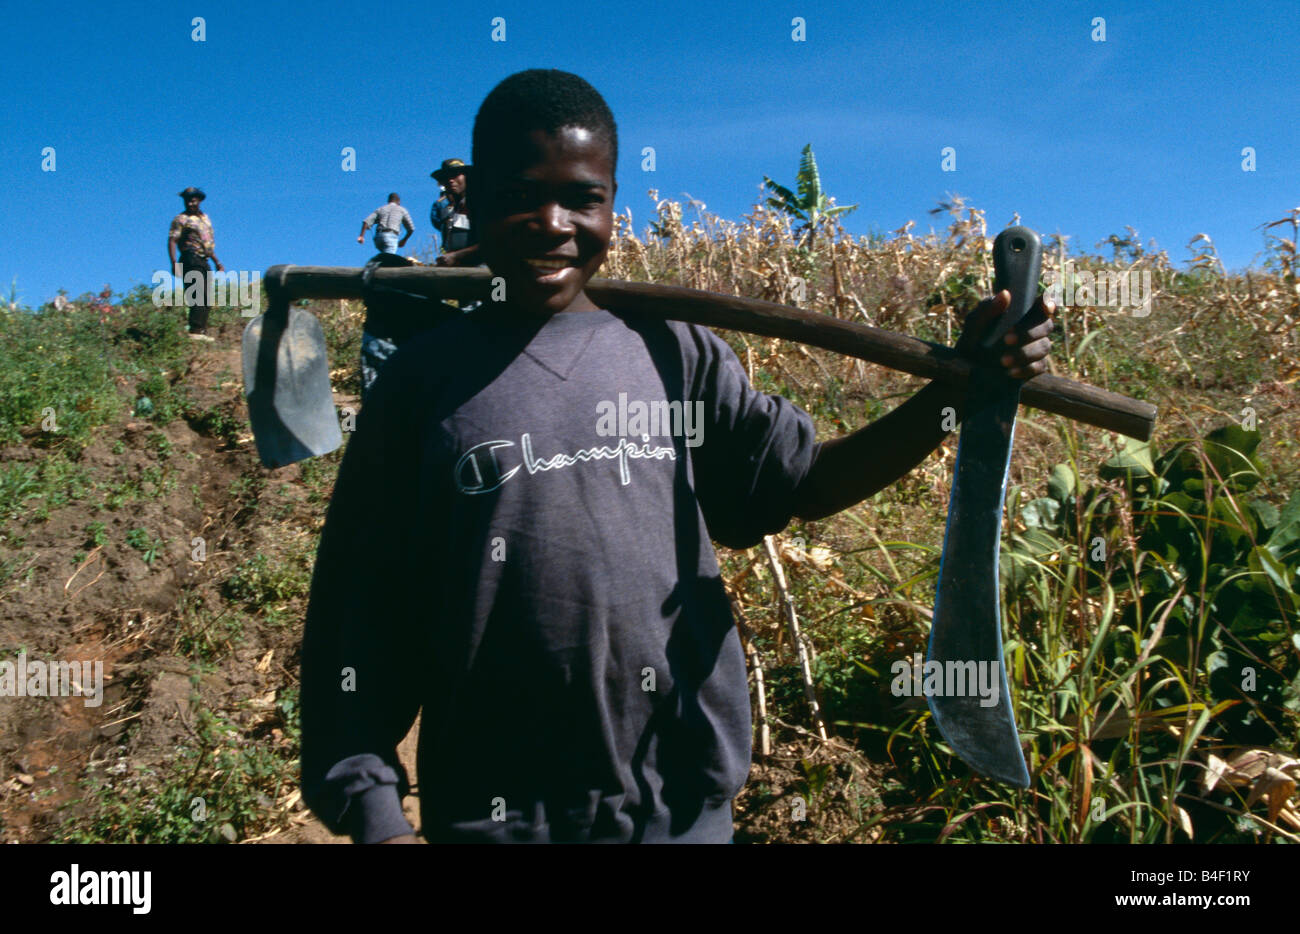 Farm workers carrying tool over his shoulder in field, portrait, Angola, Africa Stock Photo